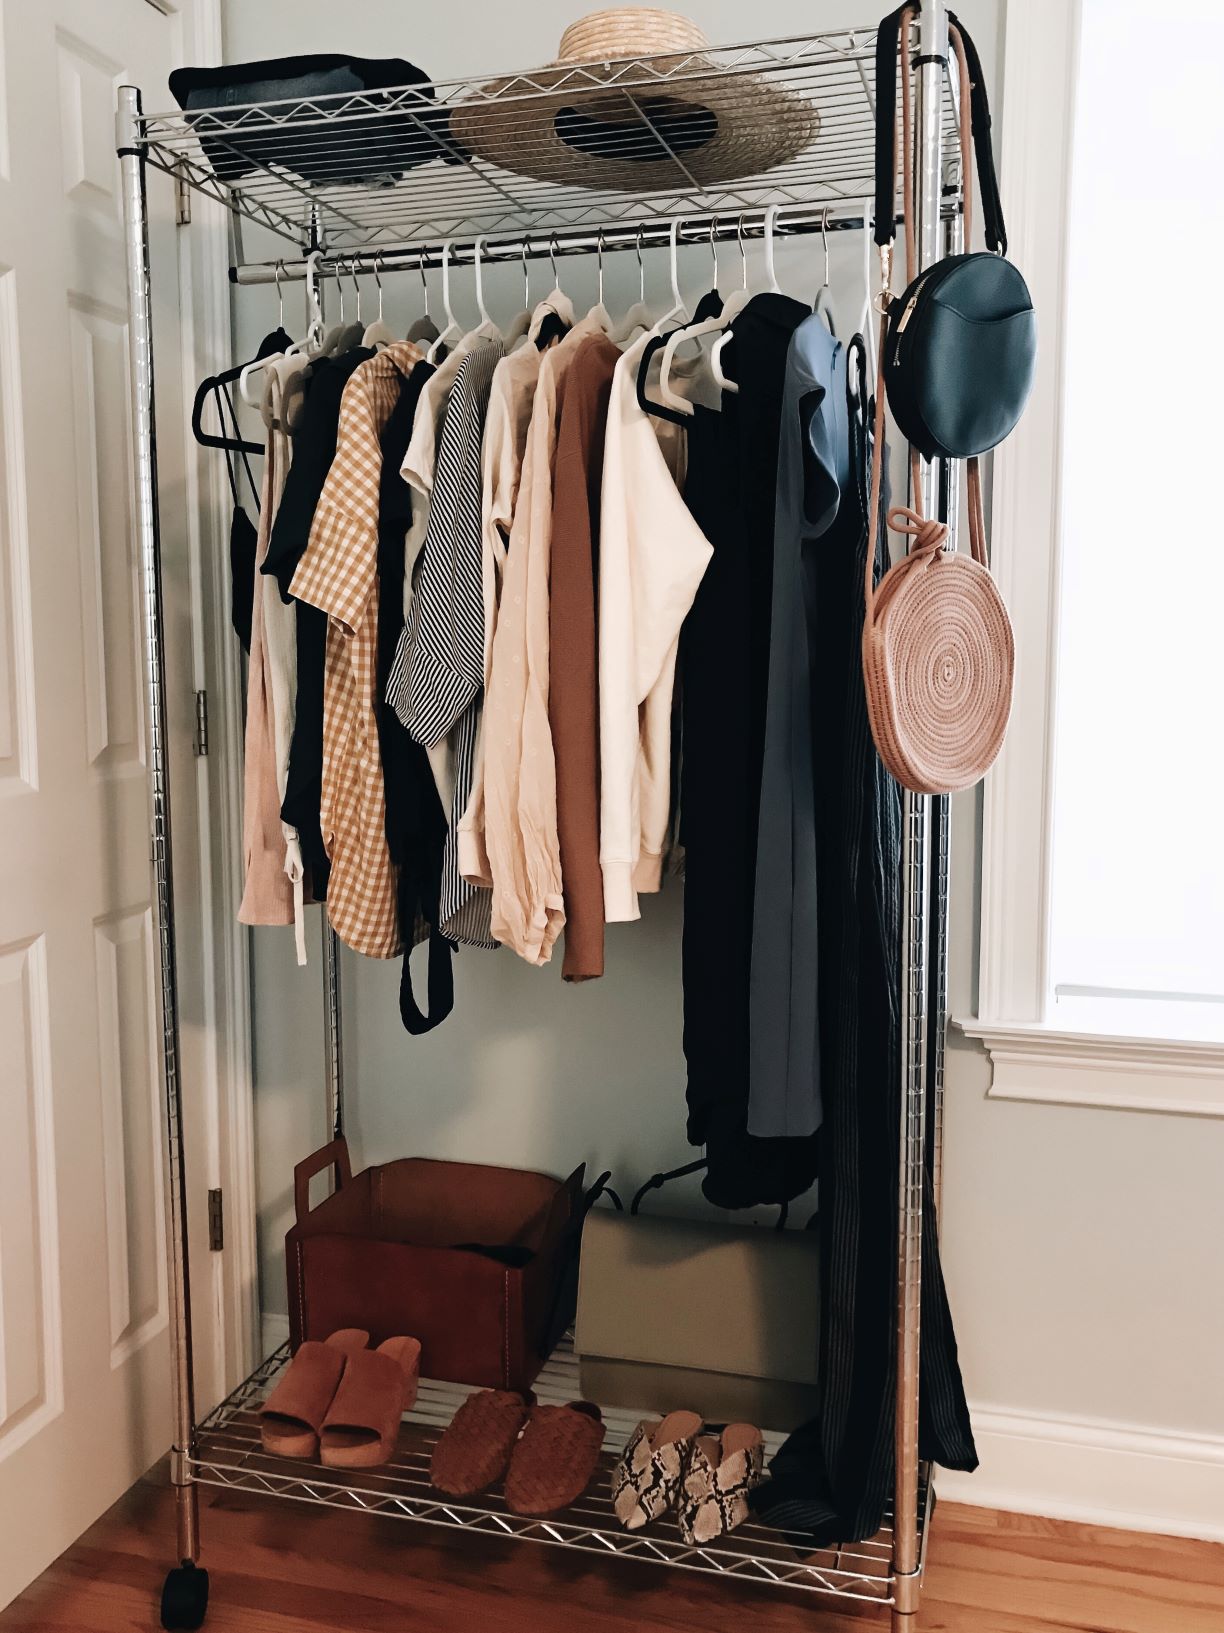 May 2019 State of the Wardrobe